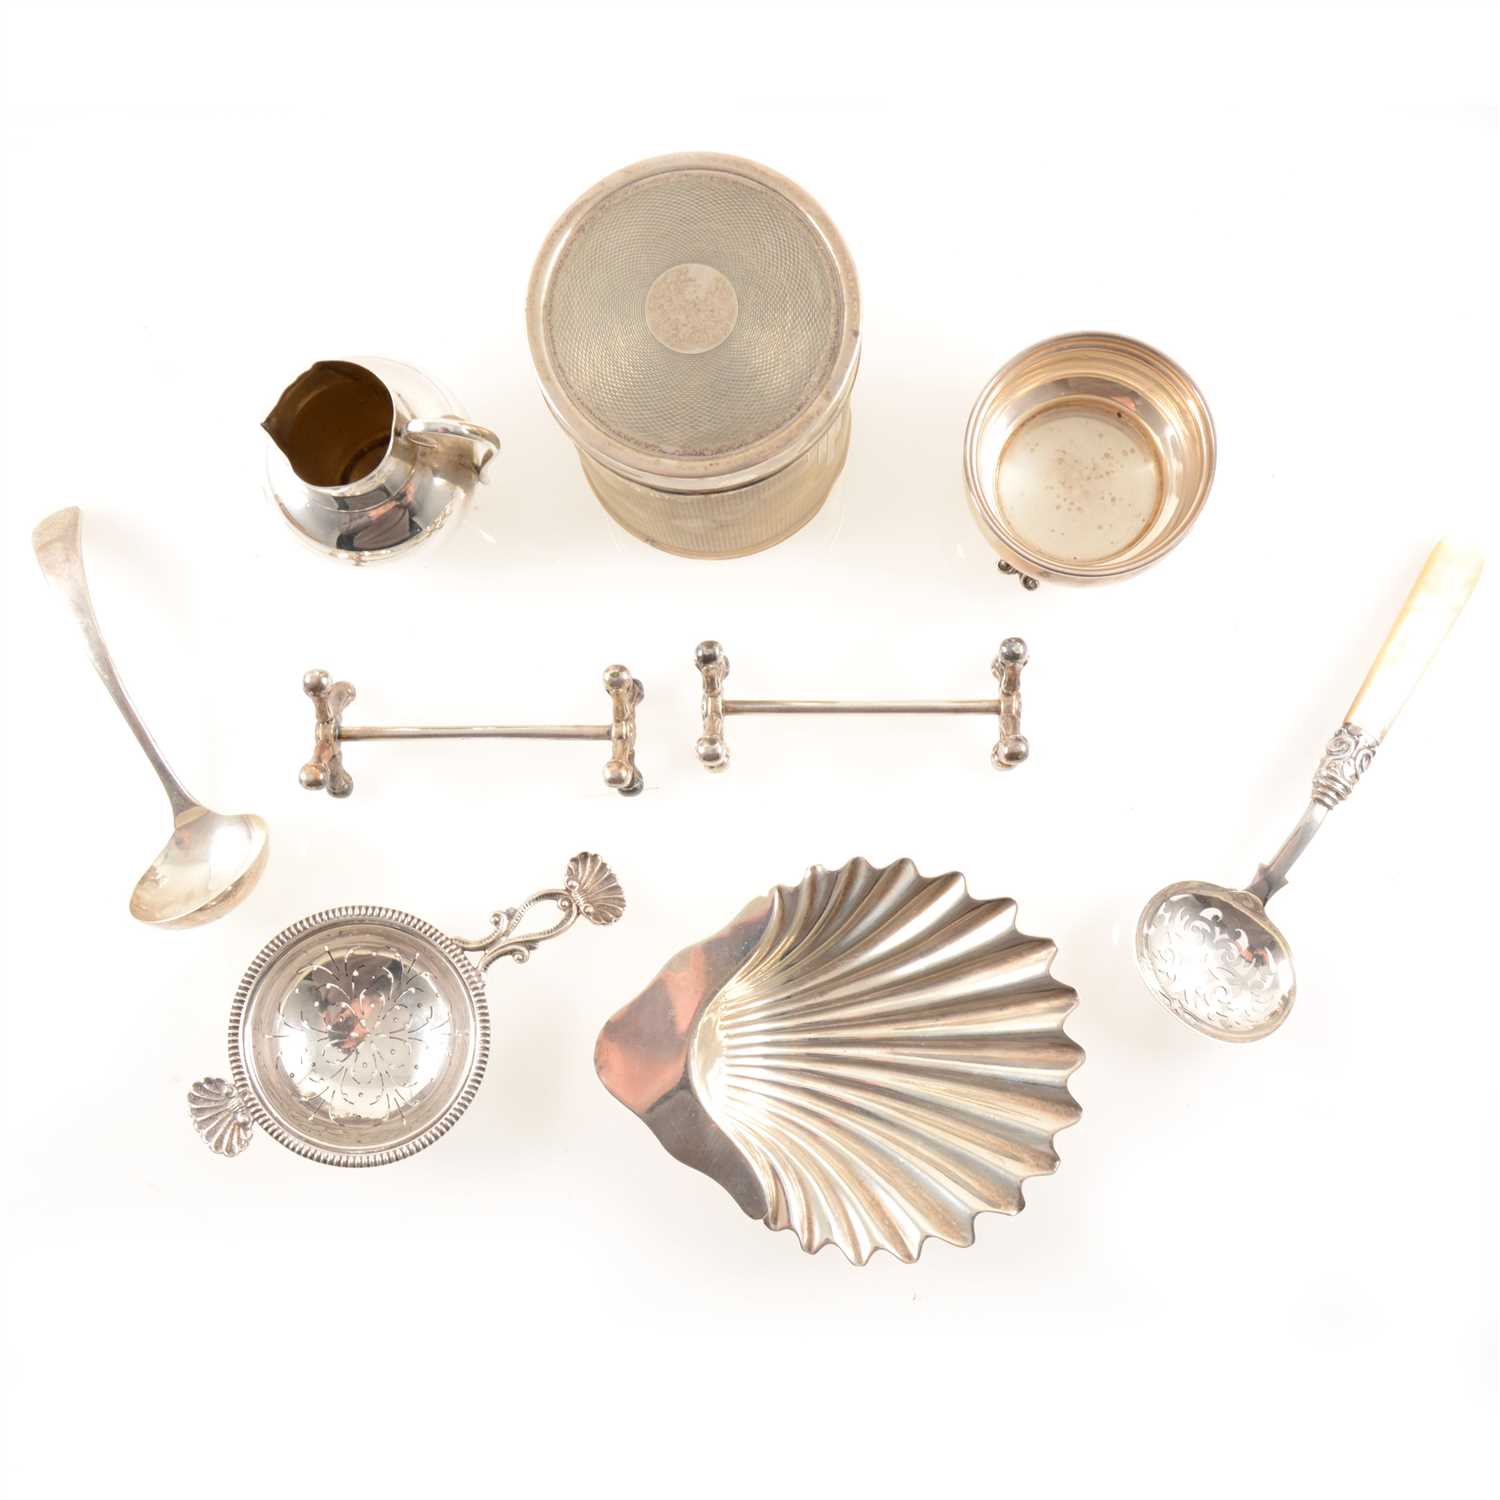 Lot 216 - A selection of silver items, to include an engine-turned jar and lid by Mappin & Webb Ltd, Sheffield 1934, a small jug by George Unite & Sons, Birmingham 1890